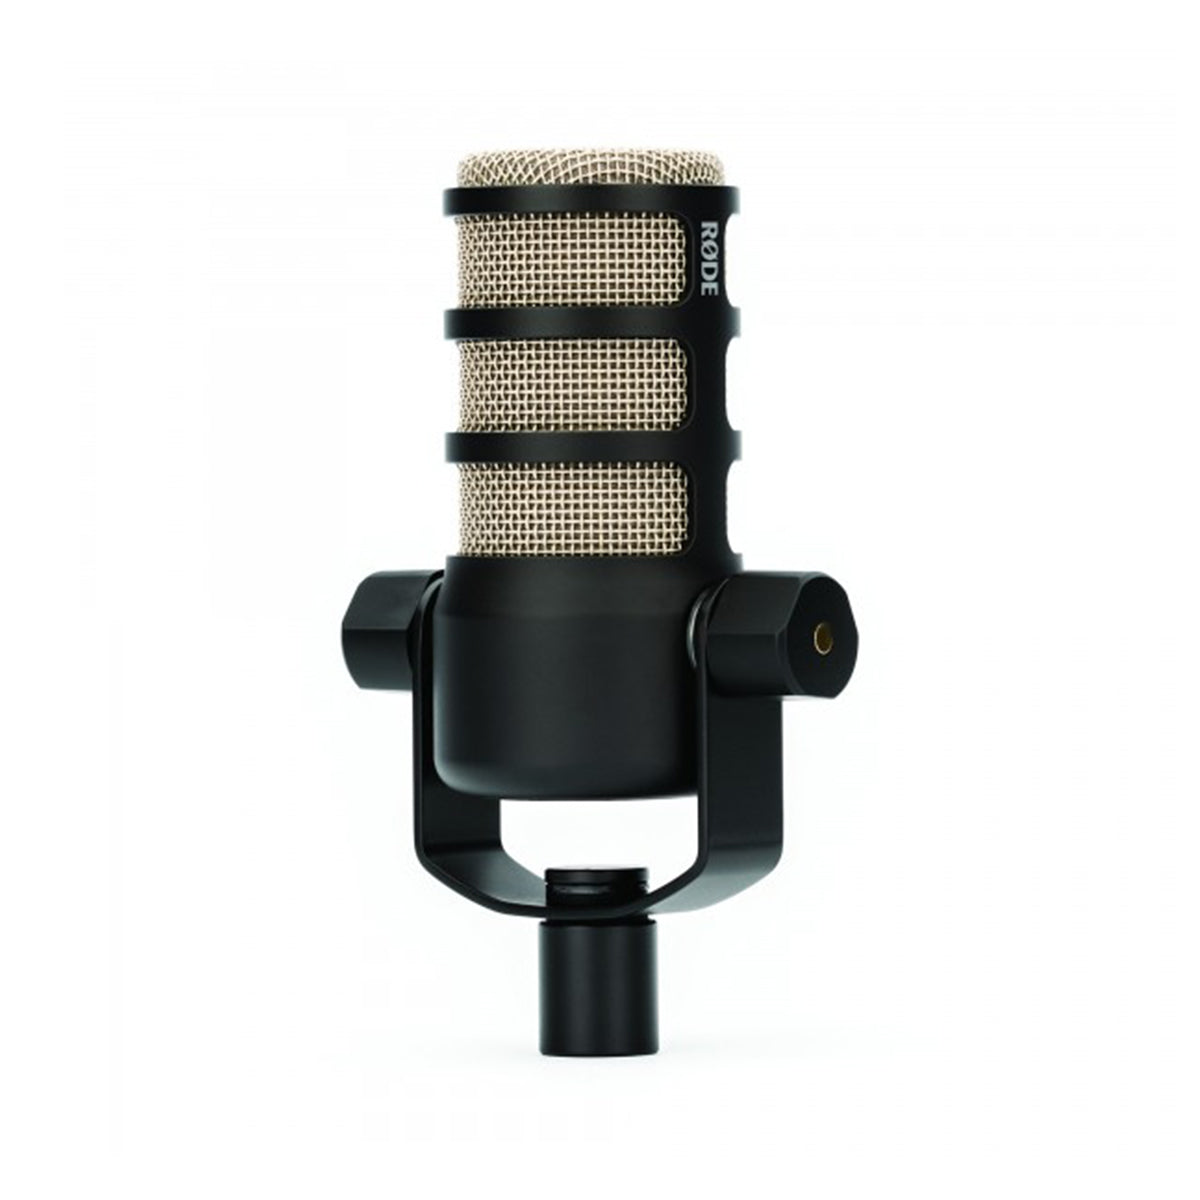 RODE PodMic Dynamic Podcasting Microphone